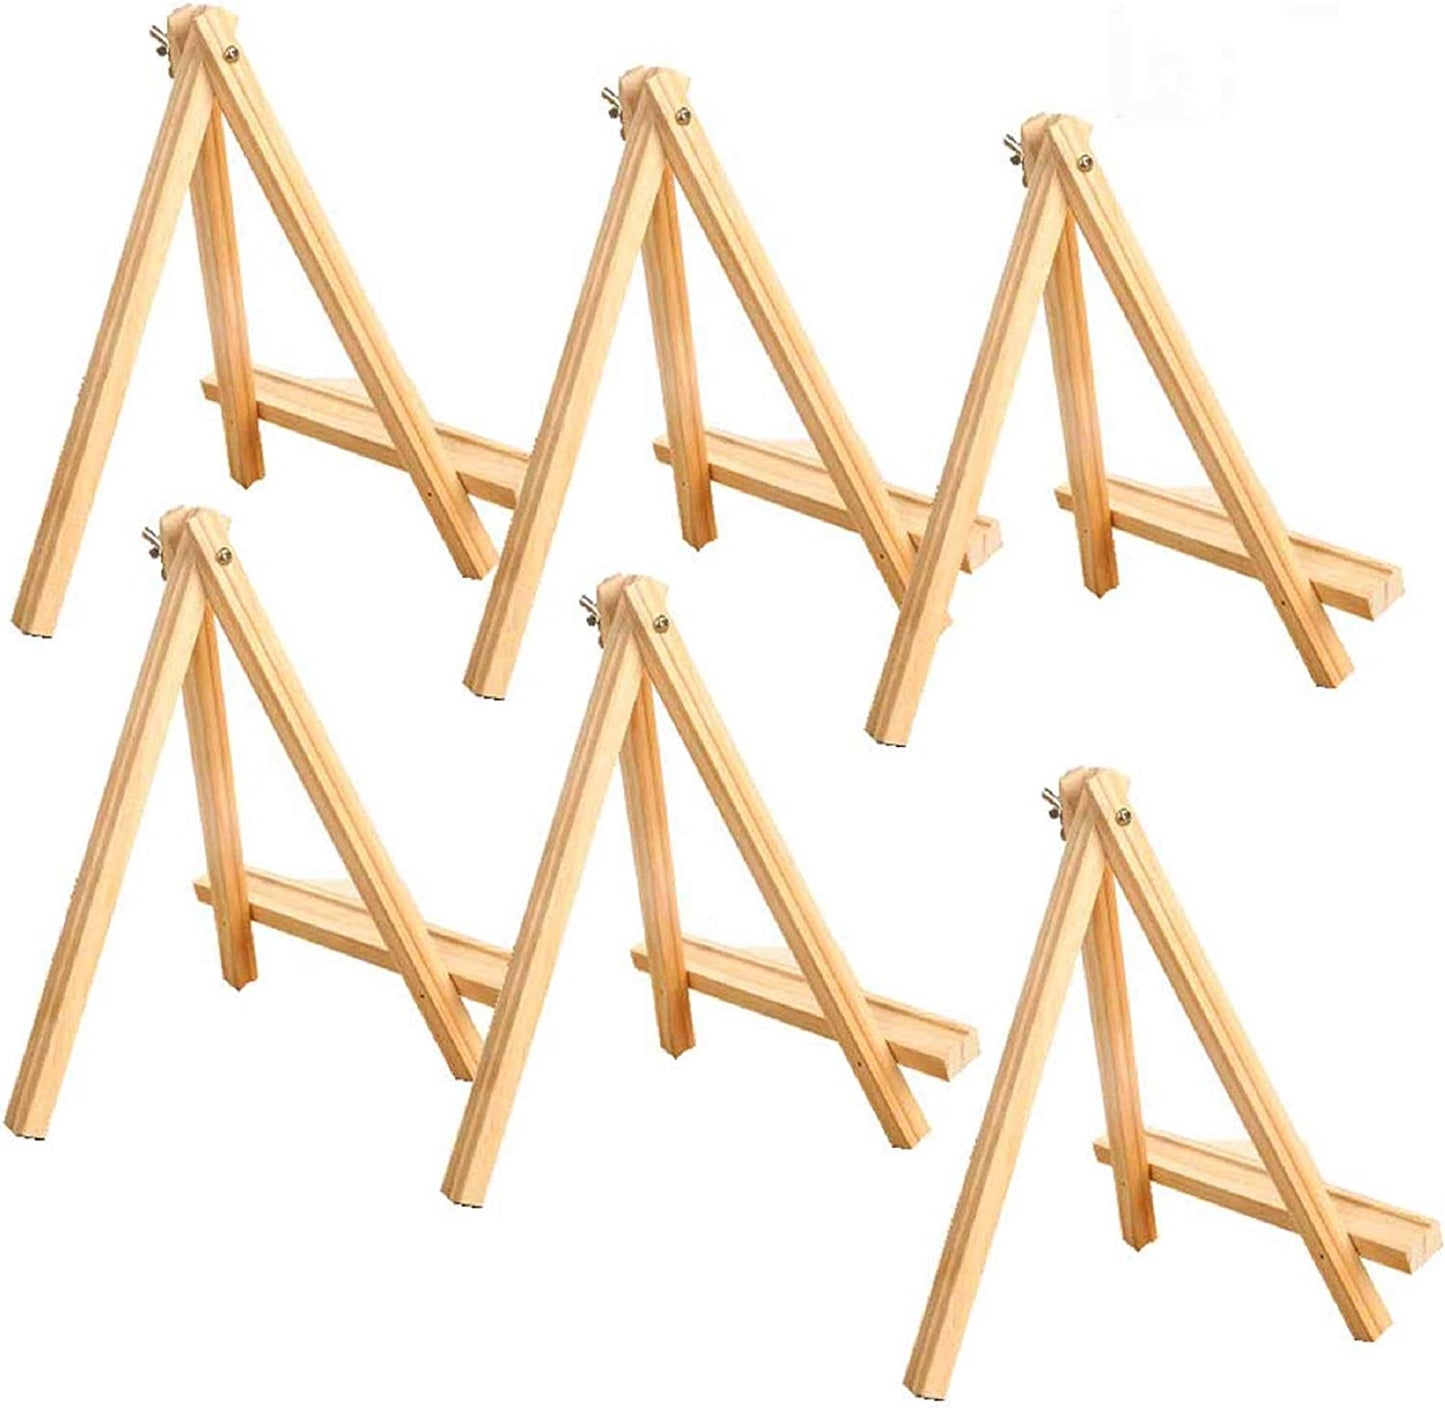 9.4 Inches Tall Wood Easels Set of Tabletop Display Easels, Art Craft Painting Easel Stand for Artist Adults Students (6Pack)